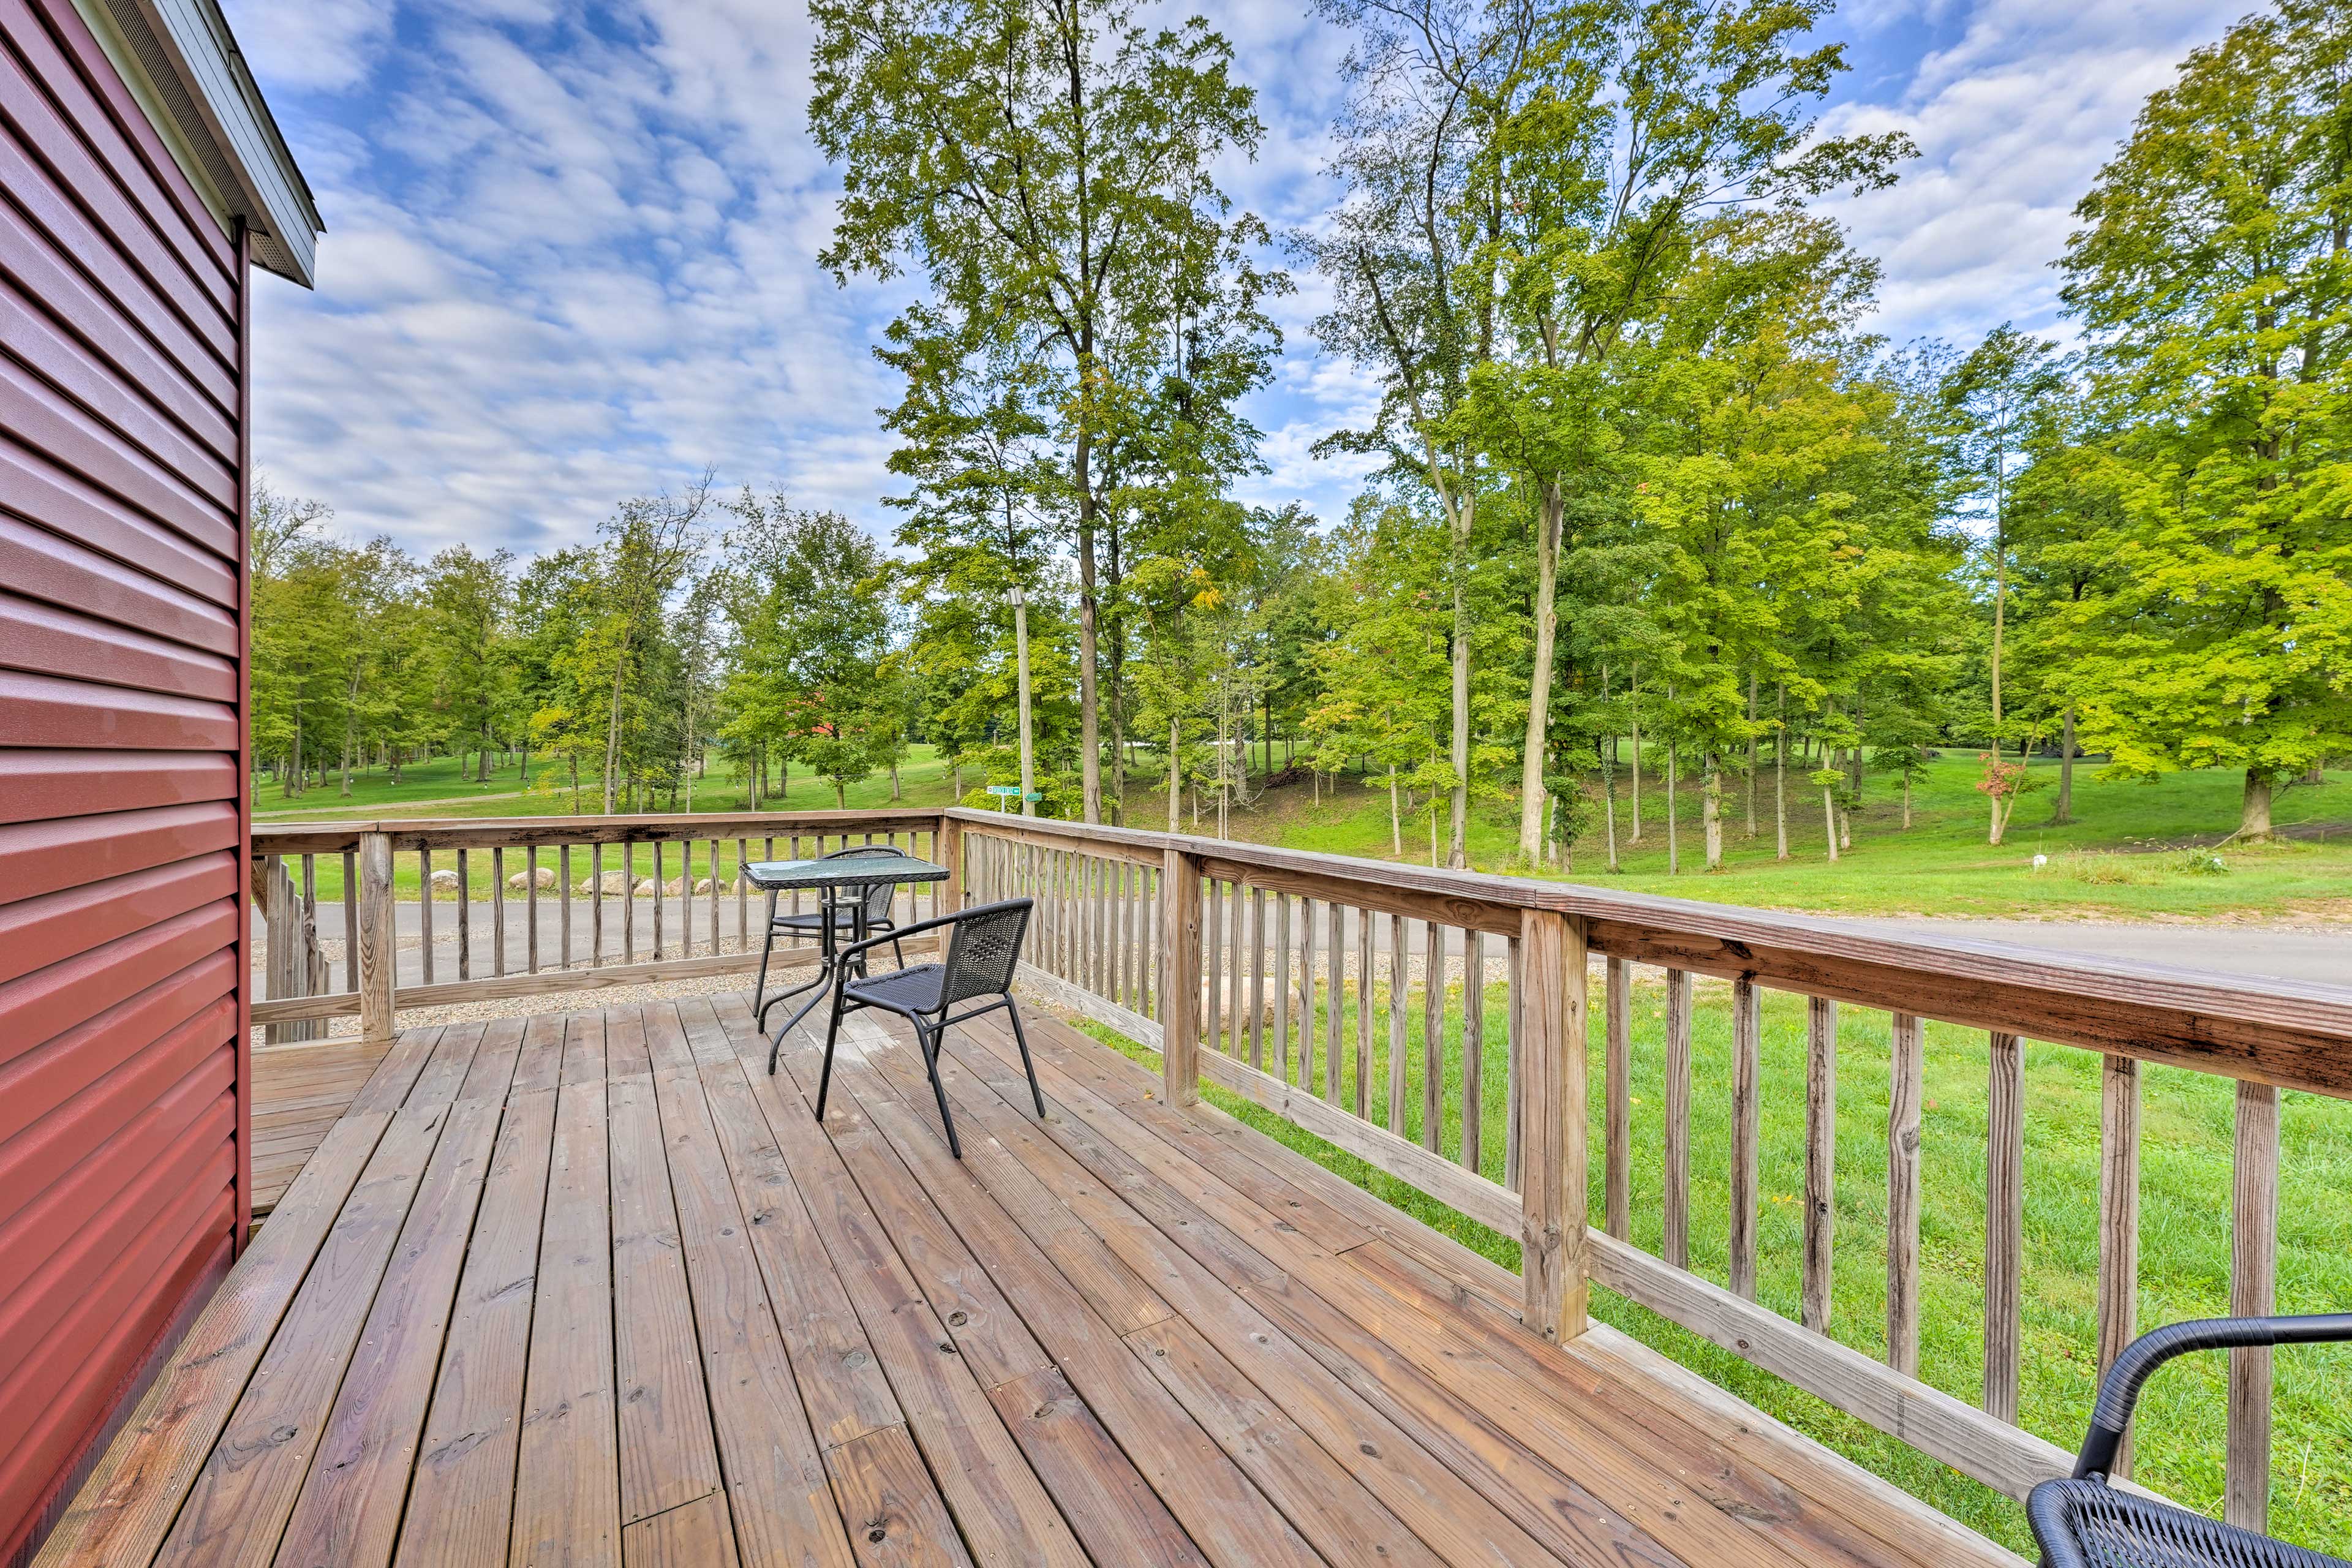 Private Deck | Outdoor Seating